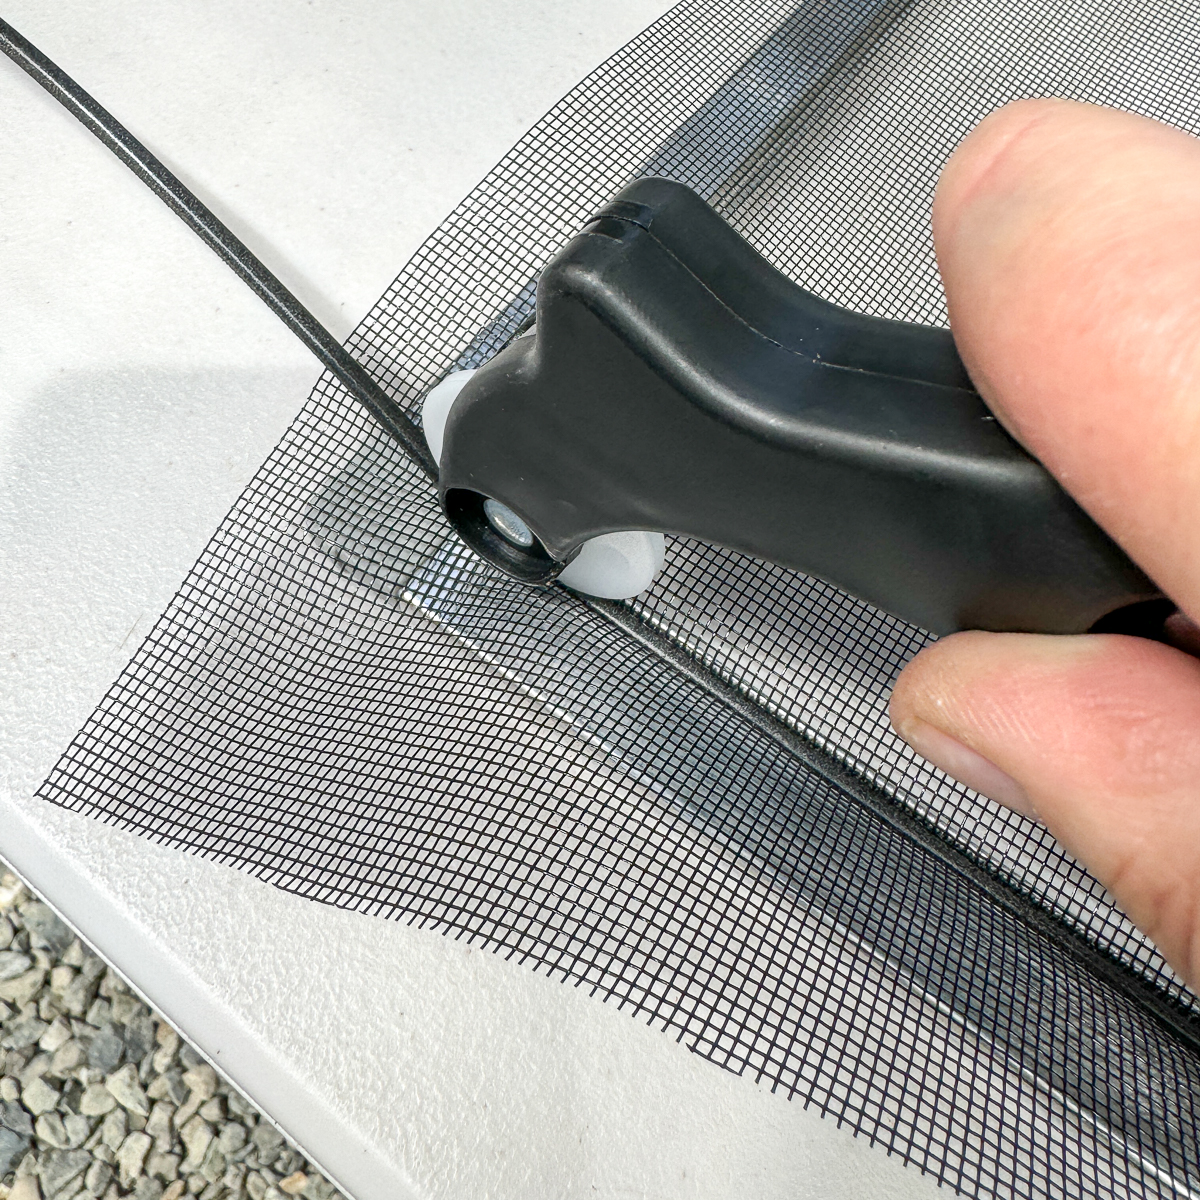 using the spline roller to press the rubber spline into the groove of the window screen frame